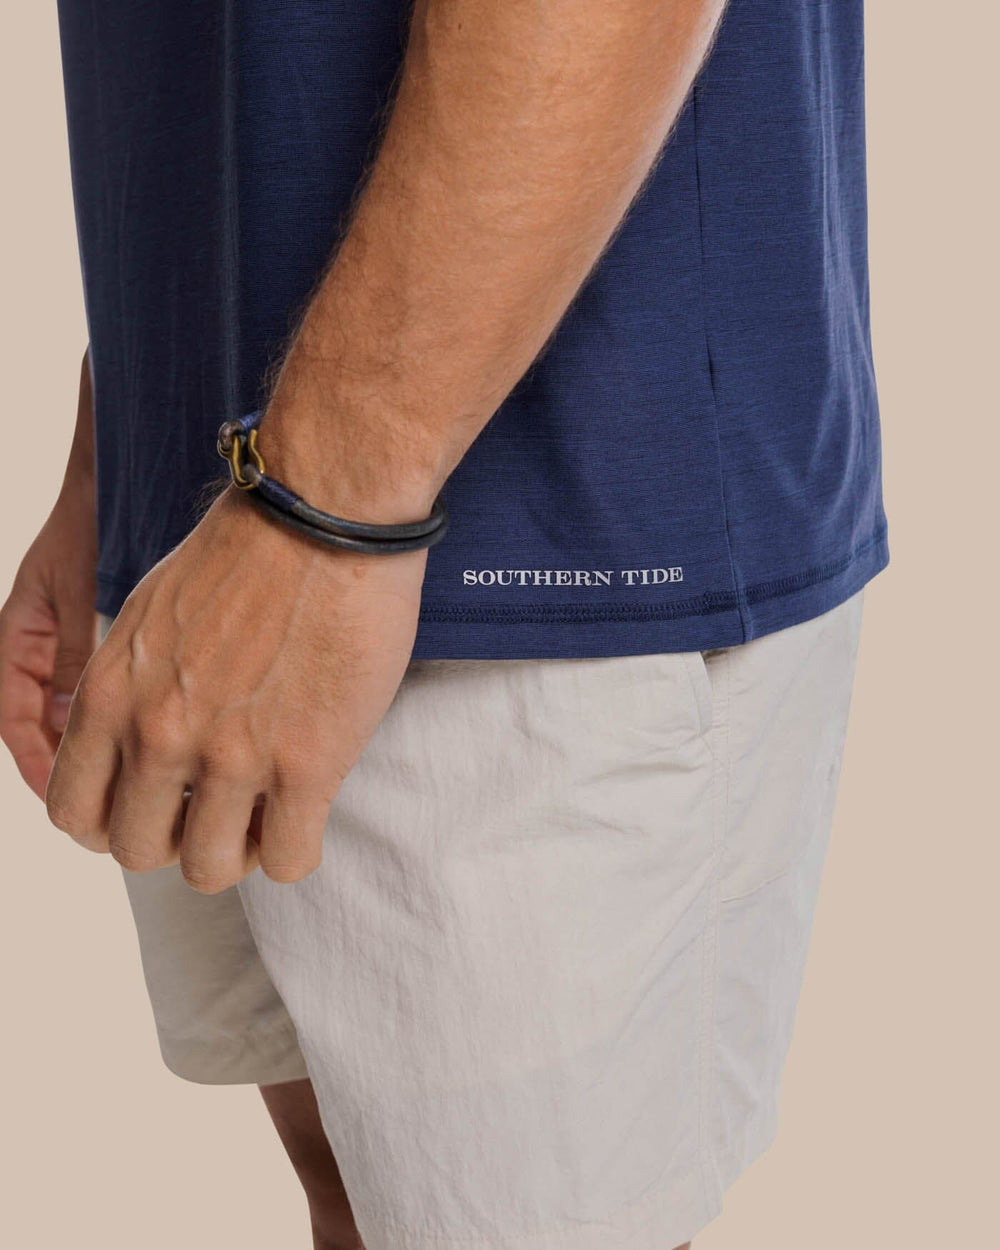 The label view of the Southern Tide brrr°®-illiant Performance Tee by Southern Tide - Nautical Navy